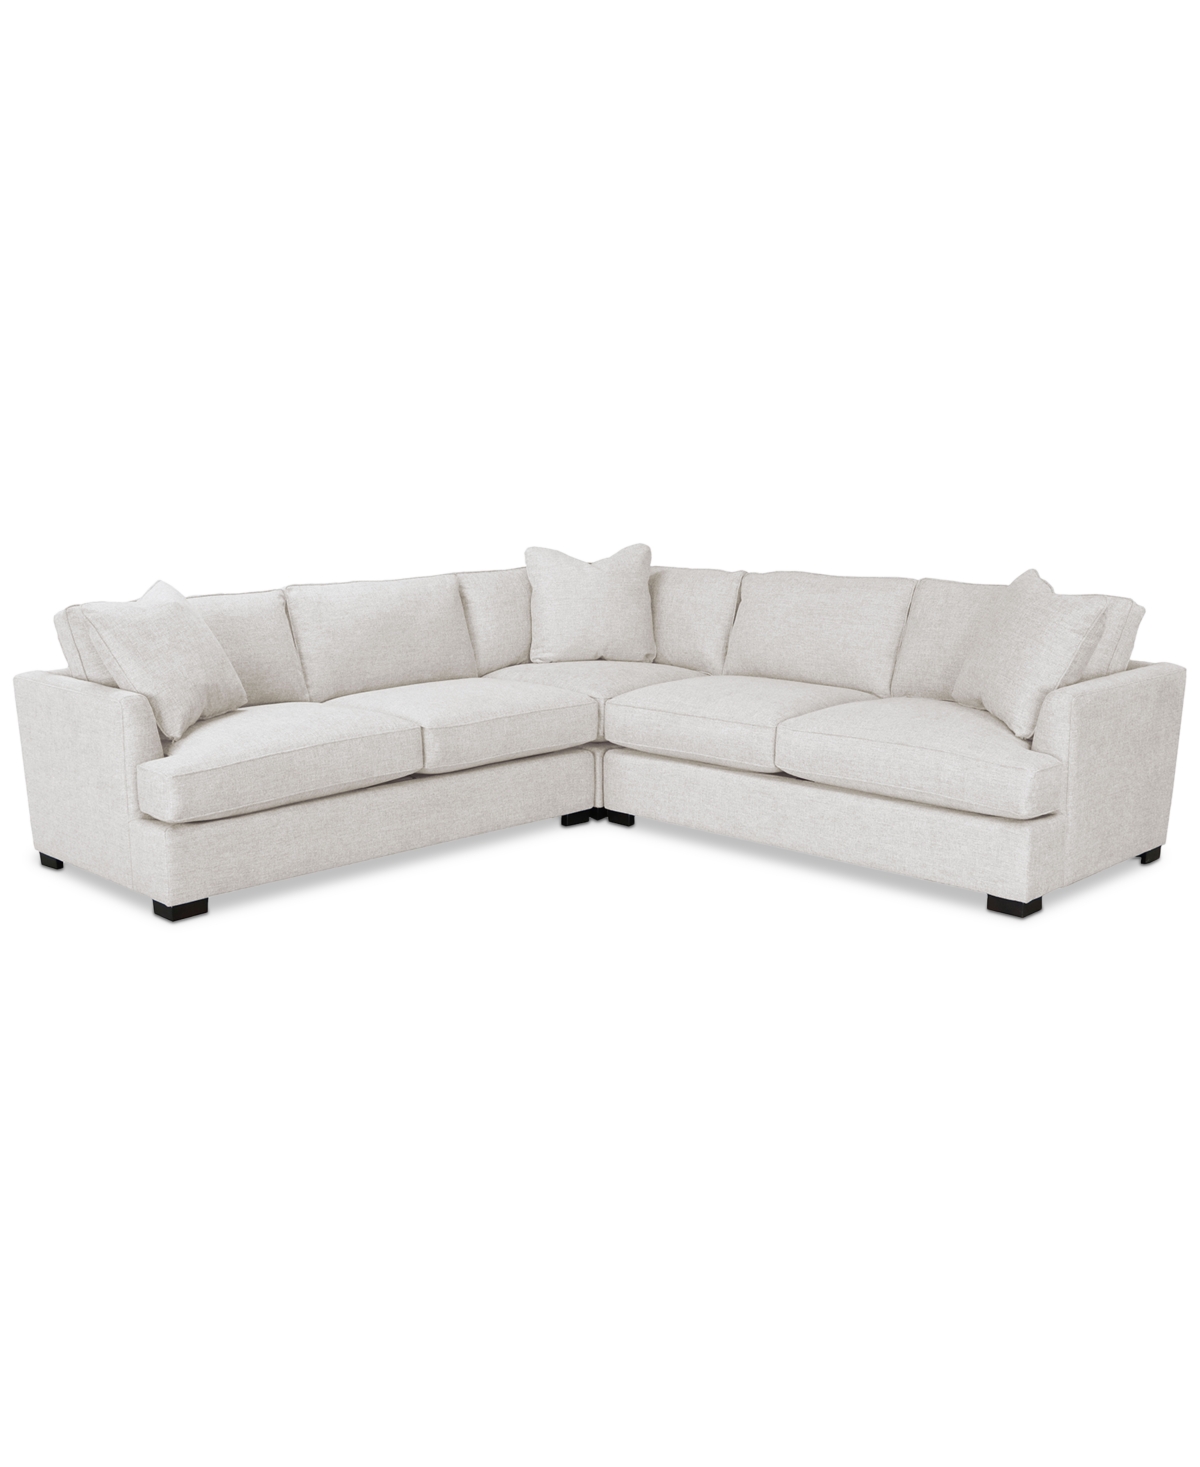 Furniture Nightford 111" 3-pc. Fabric L Sectional, Created For Macy's In Dove